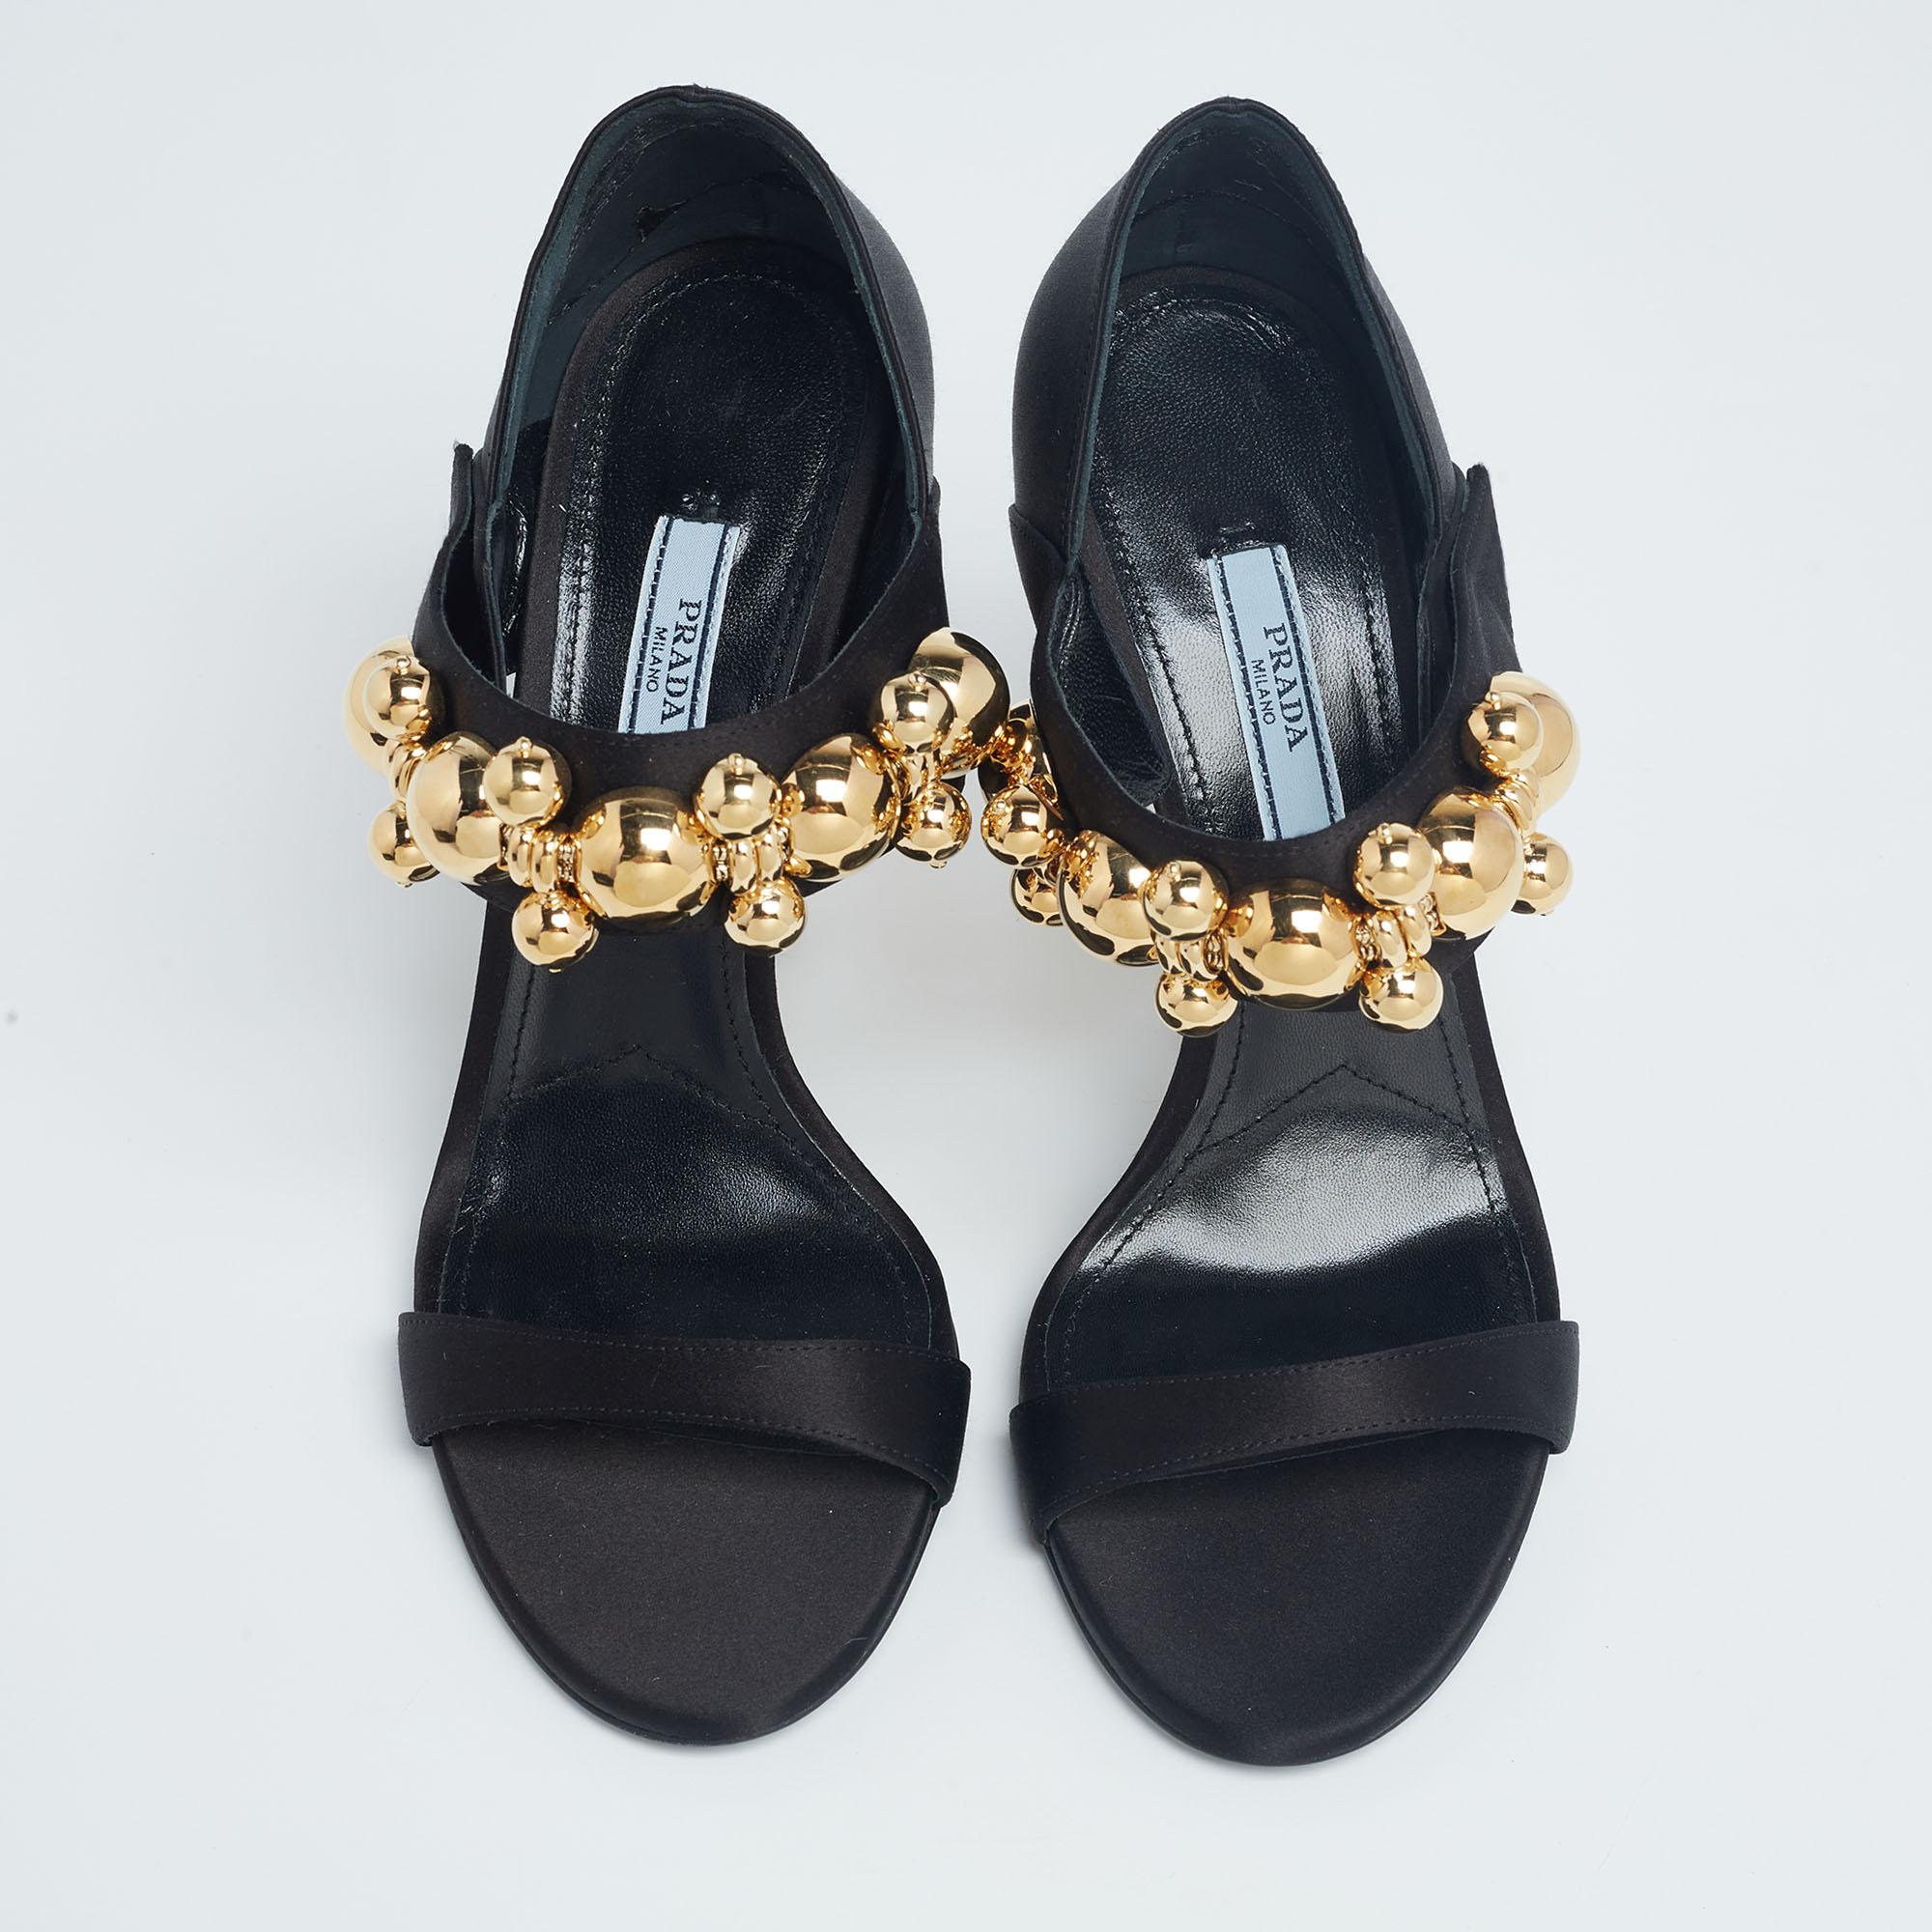 Inspired by the vintage Mary Jane style, these sandals from the House of Prada are going to be your favorite. They are designed luxuriously using black satin, which is enhanced with gold-tone embellishments. They feature open toes and 12 cm heels.